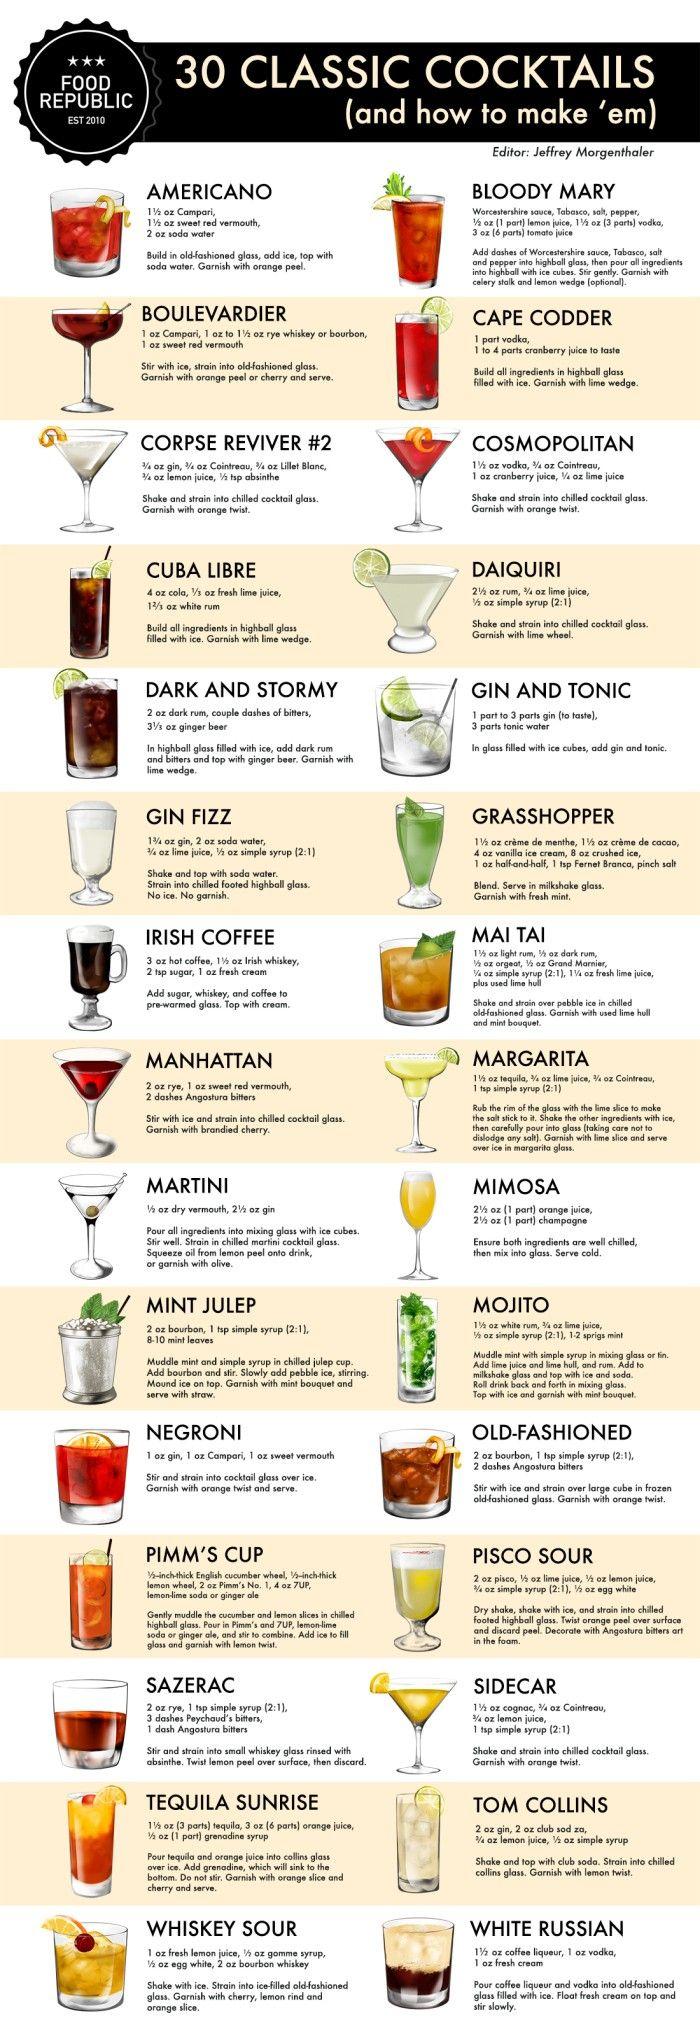 Hochzeit - How To Make 30 Classic Cocktails: An Illustrated Guide